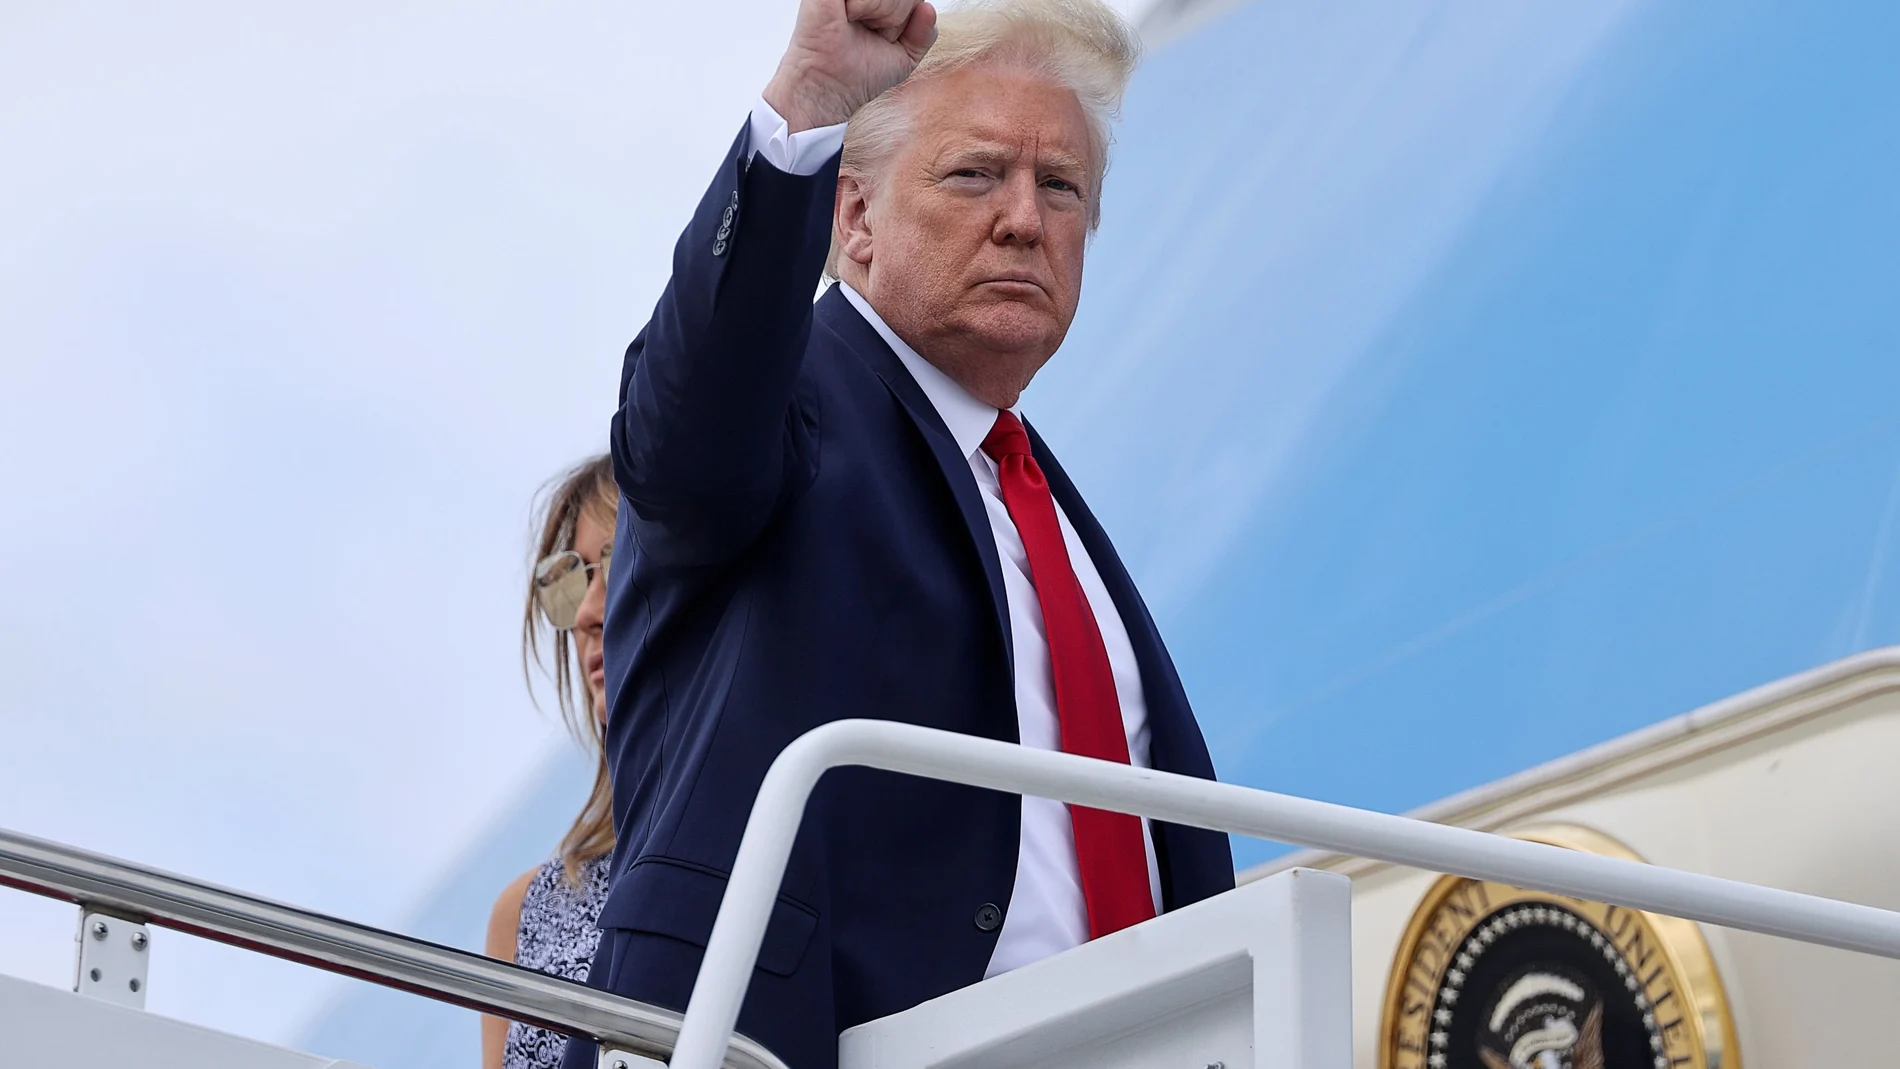 FILE PHOTO: U.S. President Trump departs Washington for travel to the Kennedy Space Center in Florida at Joint Base Andrews in Maryland